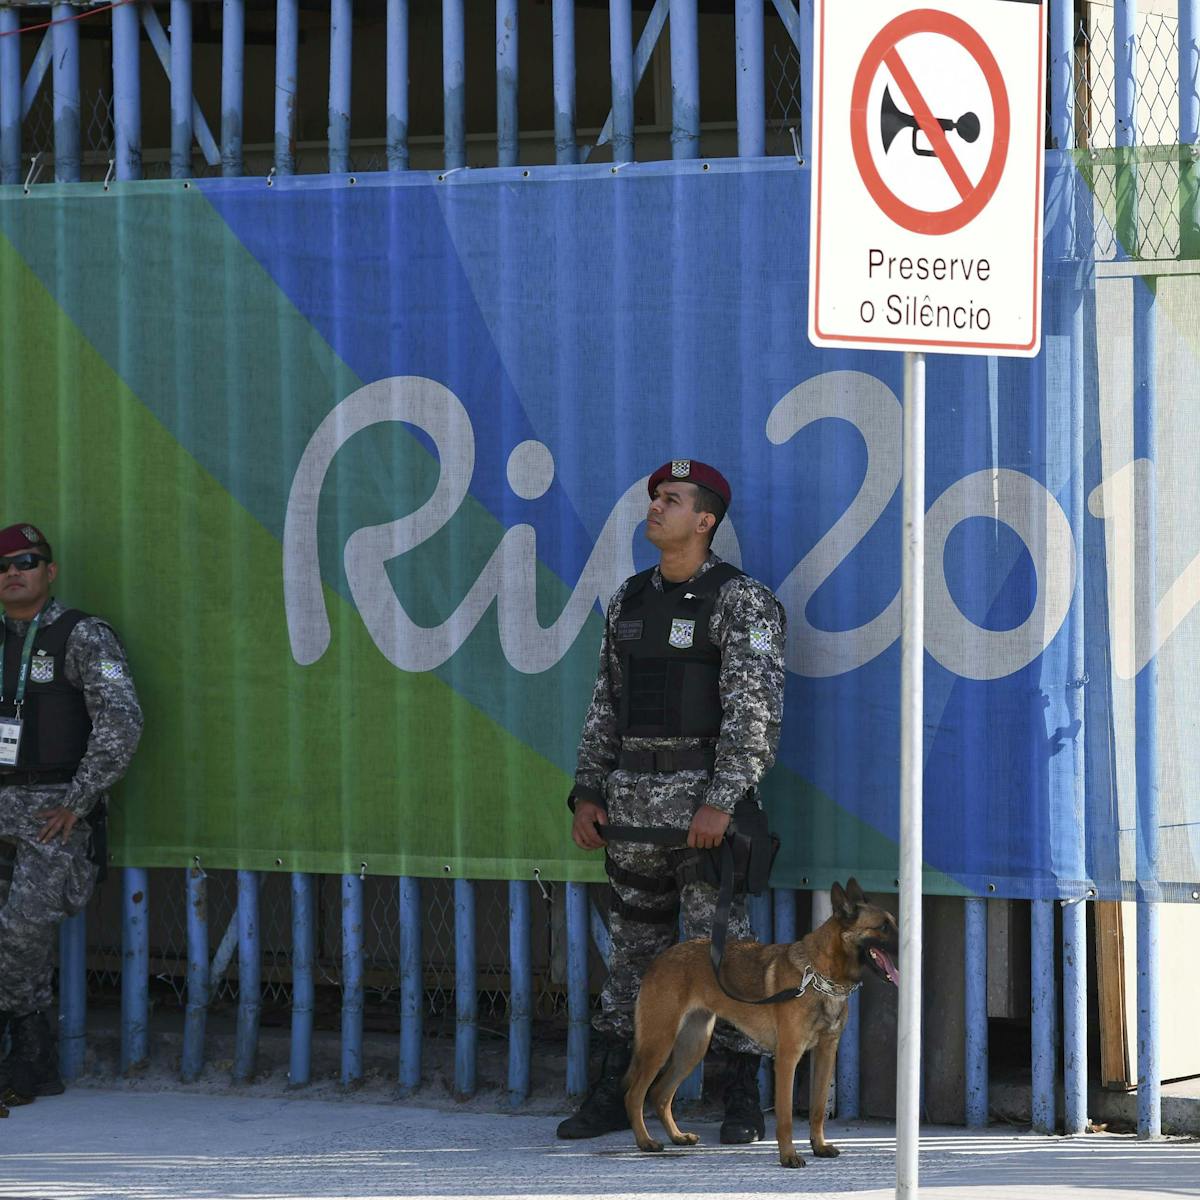 Violence is normal in Brazil, as visitors to Rio 2016 are finding out